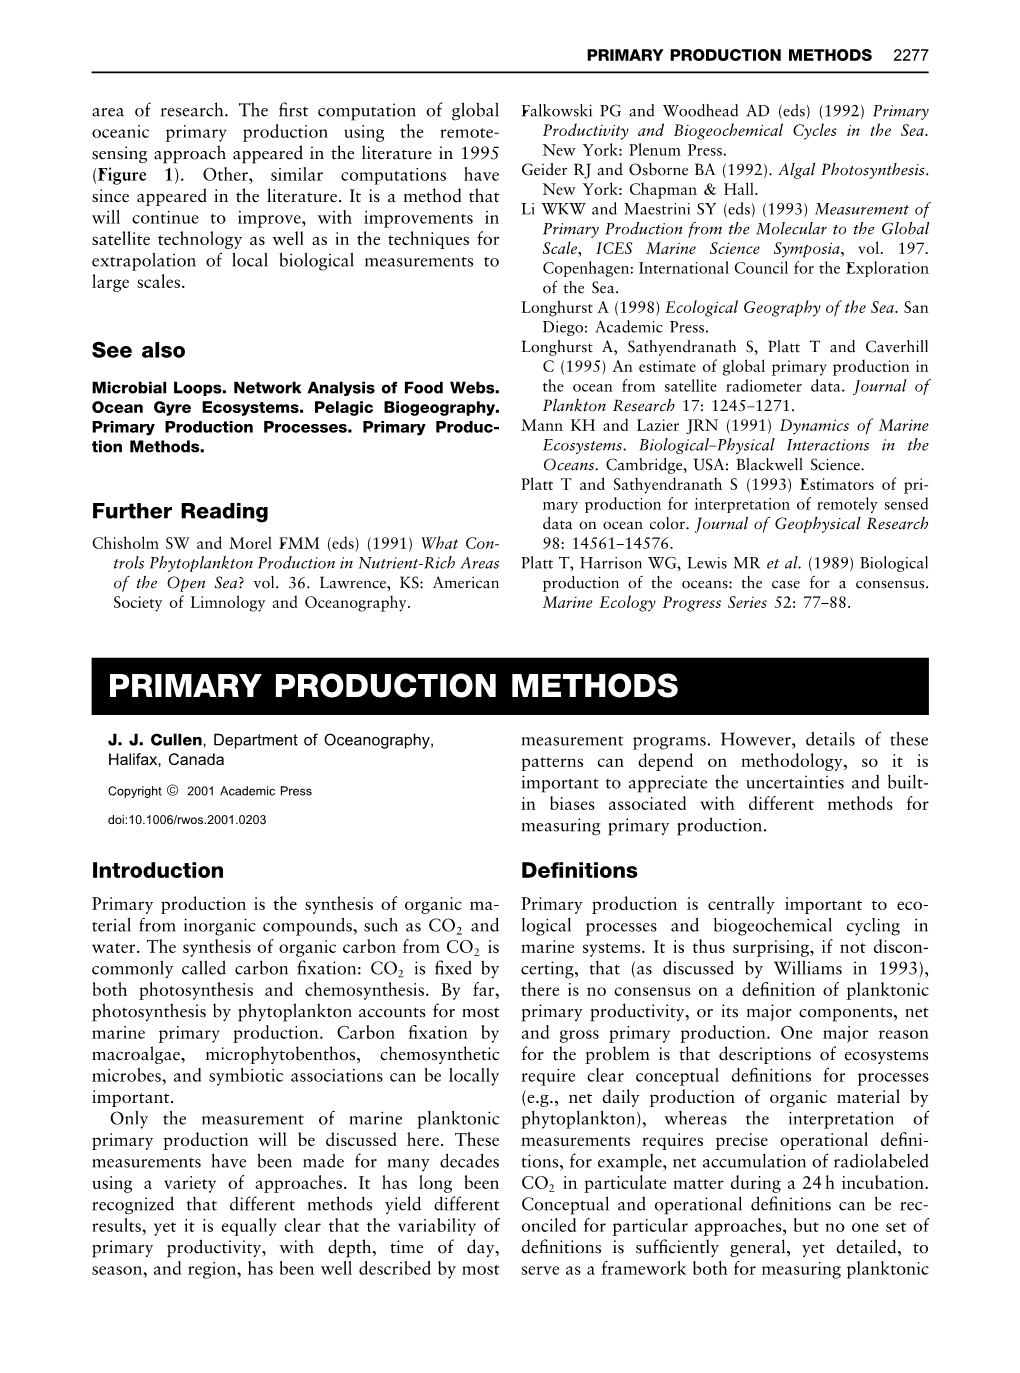 primary production research articles